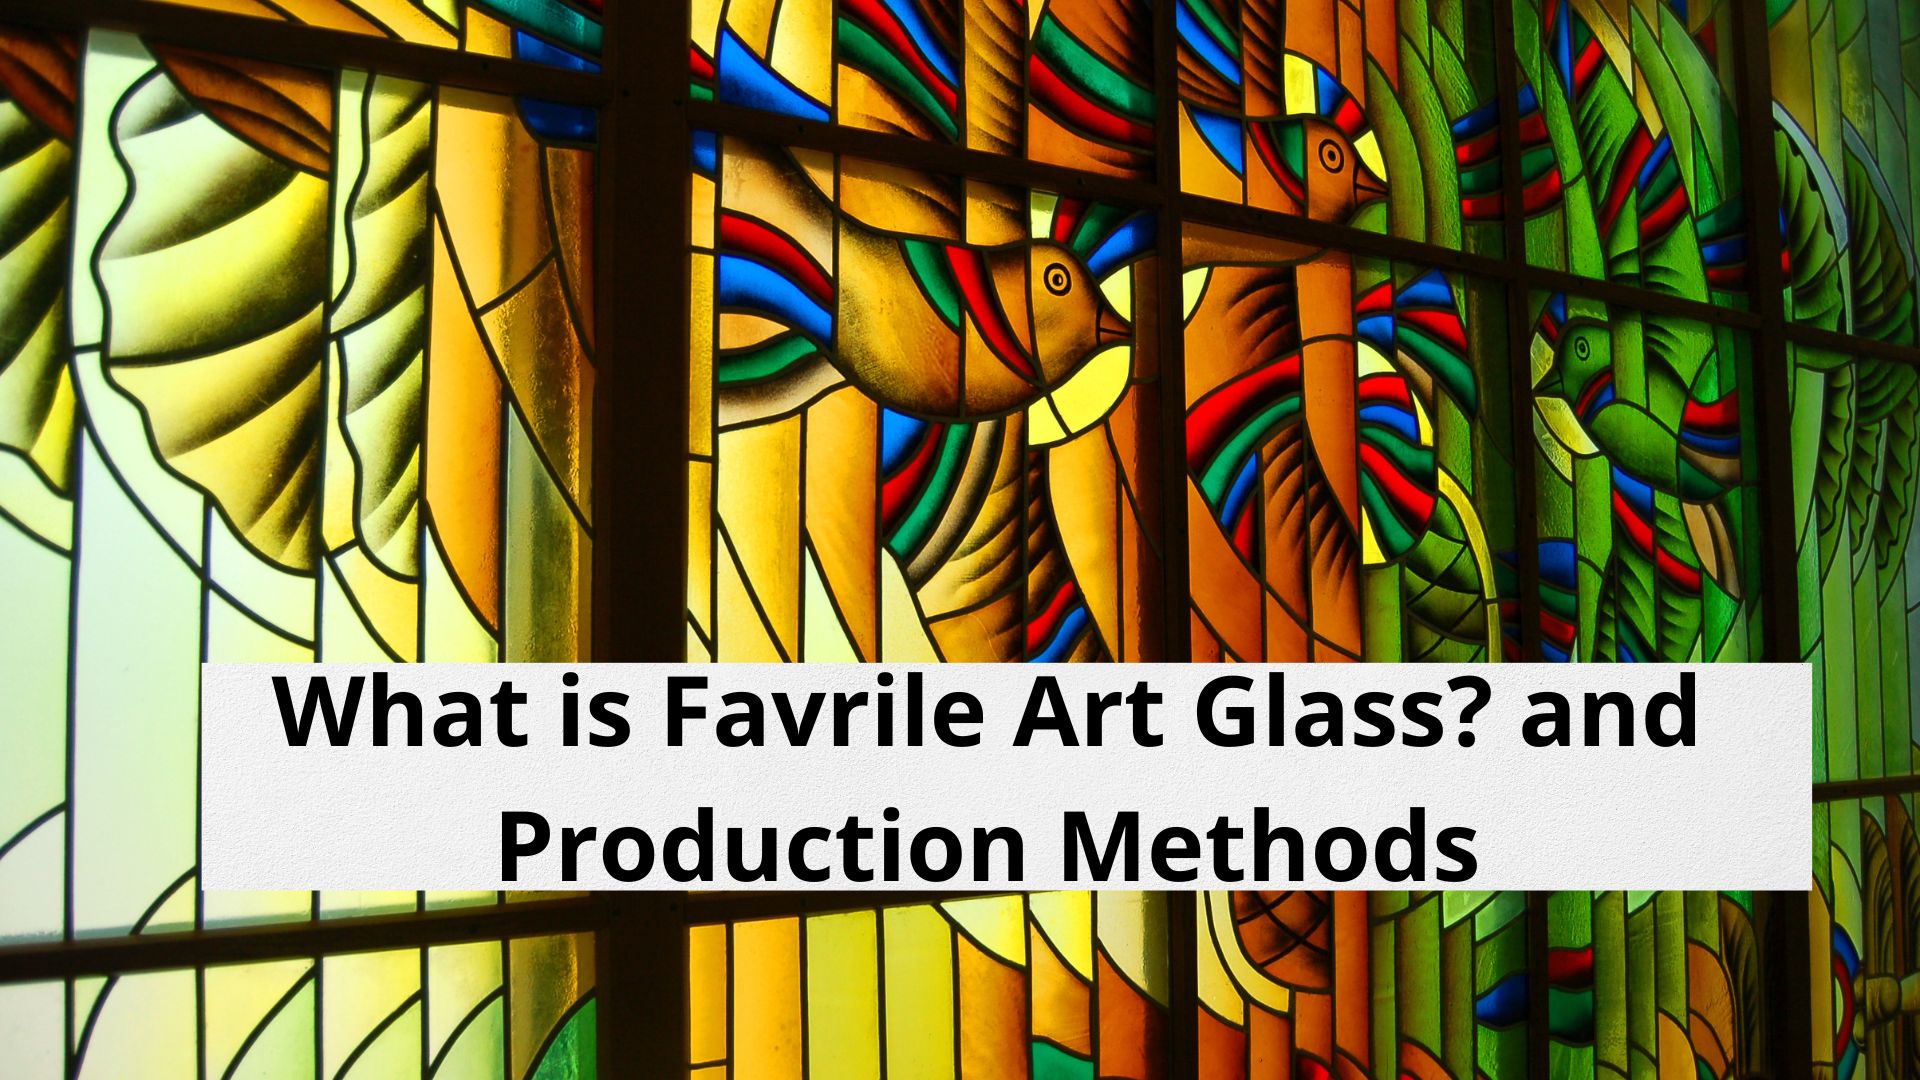 Image of Favrile Glass decorative window, with caption asking "What is Favrile Art Glass? And Production Methods